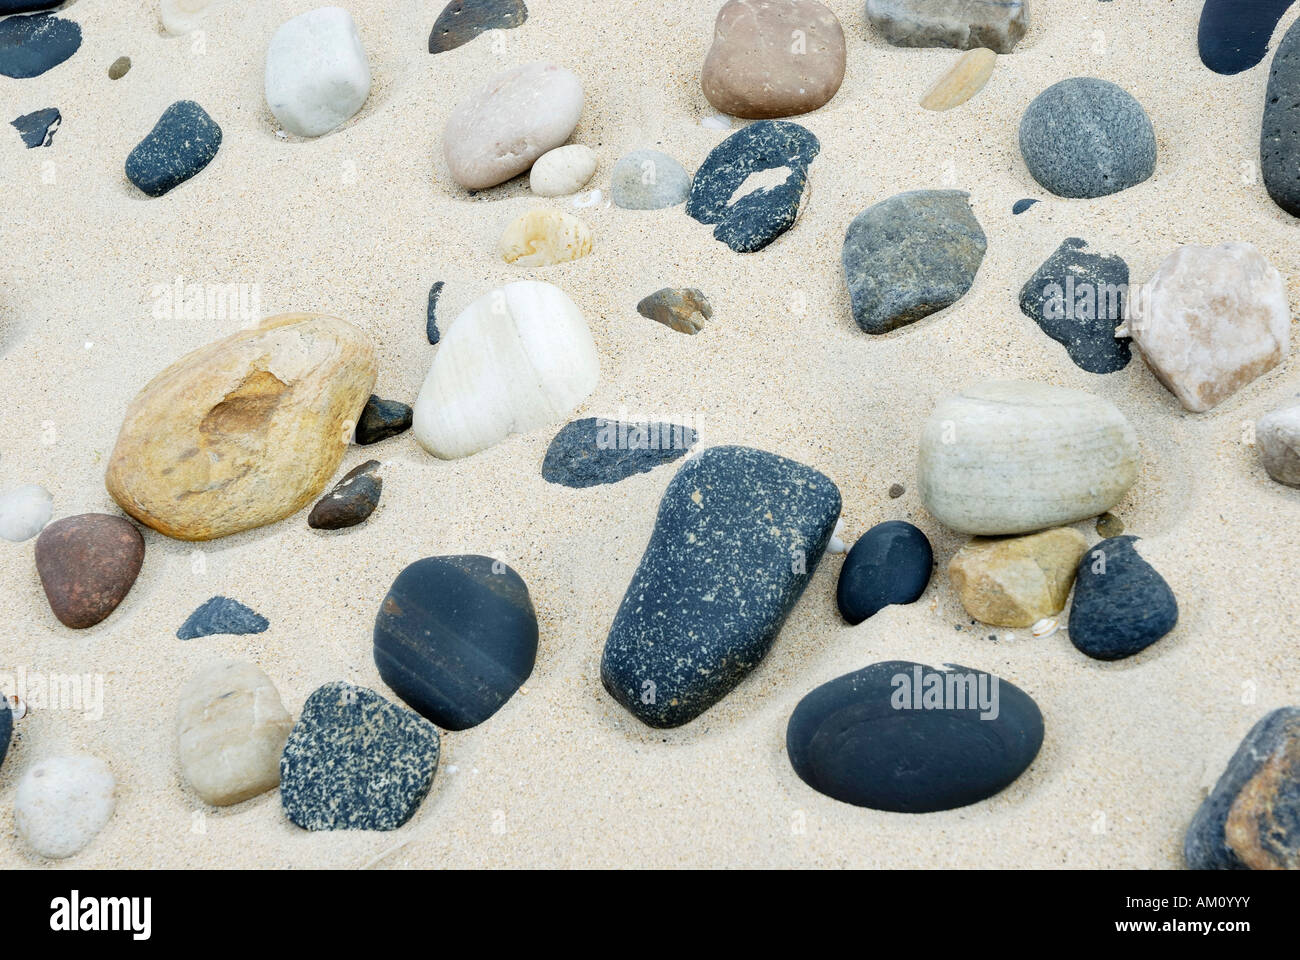 Pollished pebbles of volcanic and sedimentary origine permanently grinded by blowing sand, Ireland Stock Photo